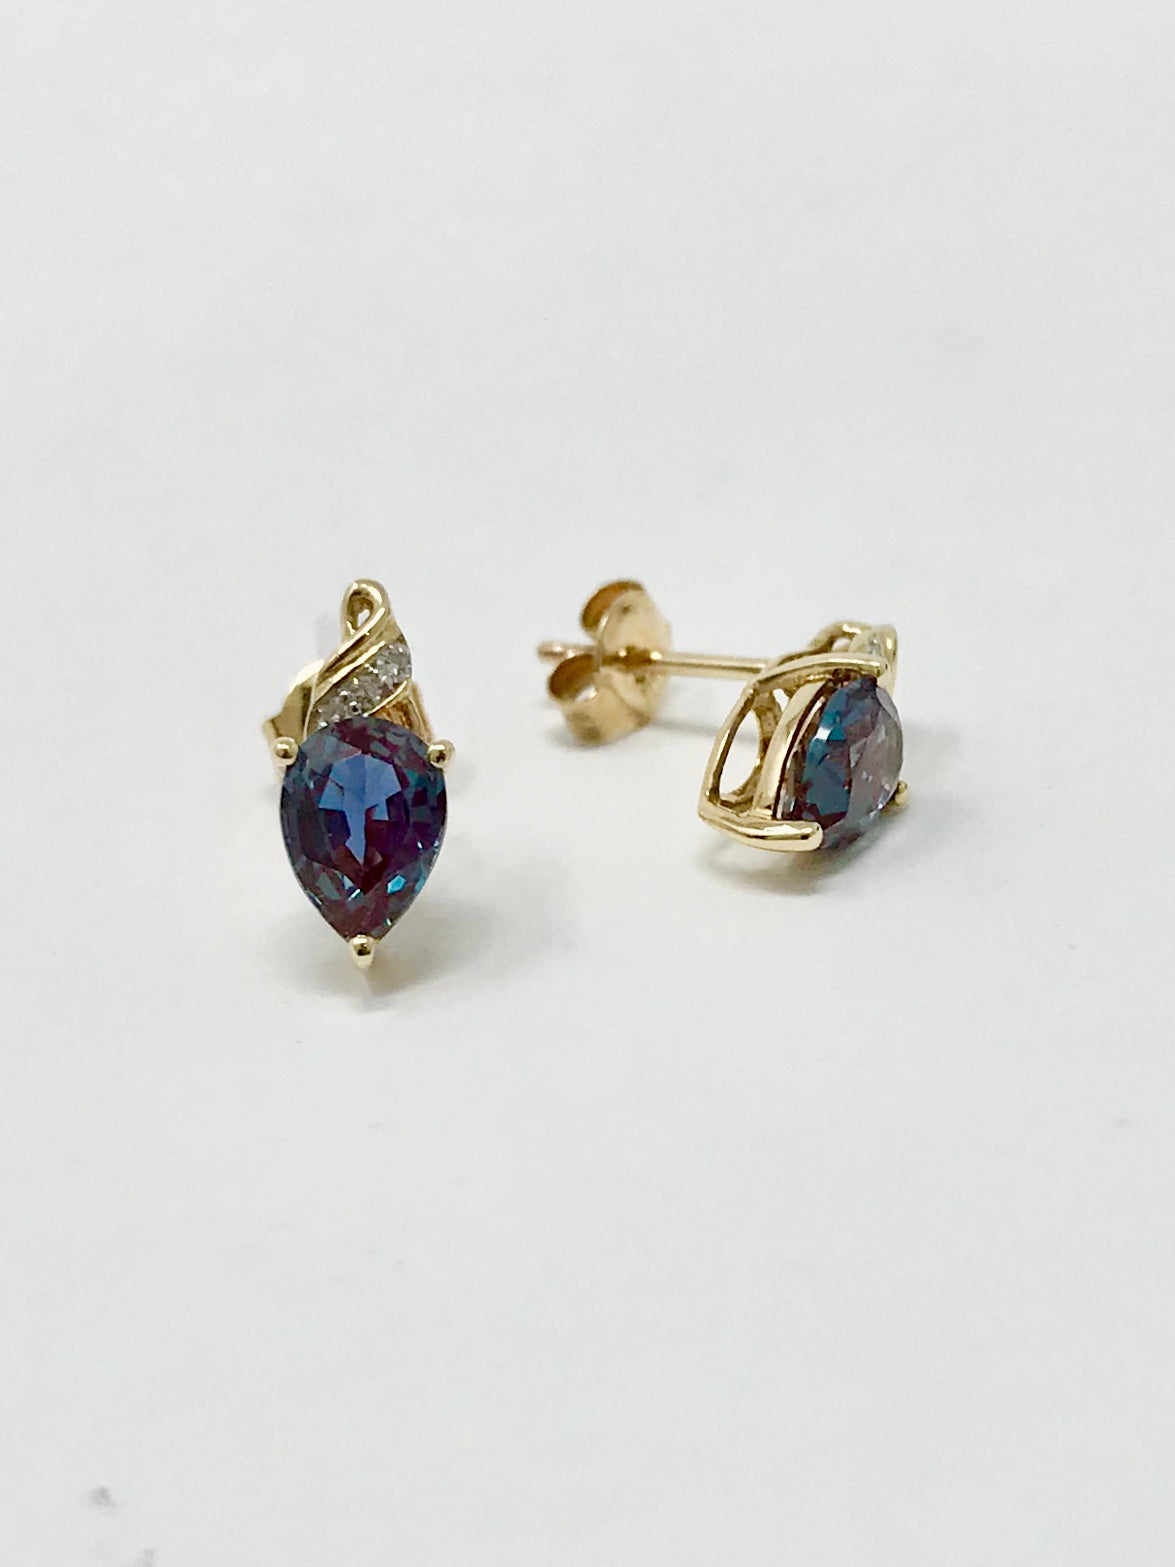 10K Yellow Gold 1.70cttw Created Alexandrite and 0.02cttw Diamond Earrings